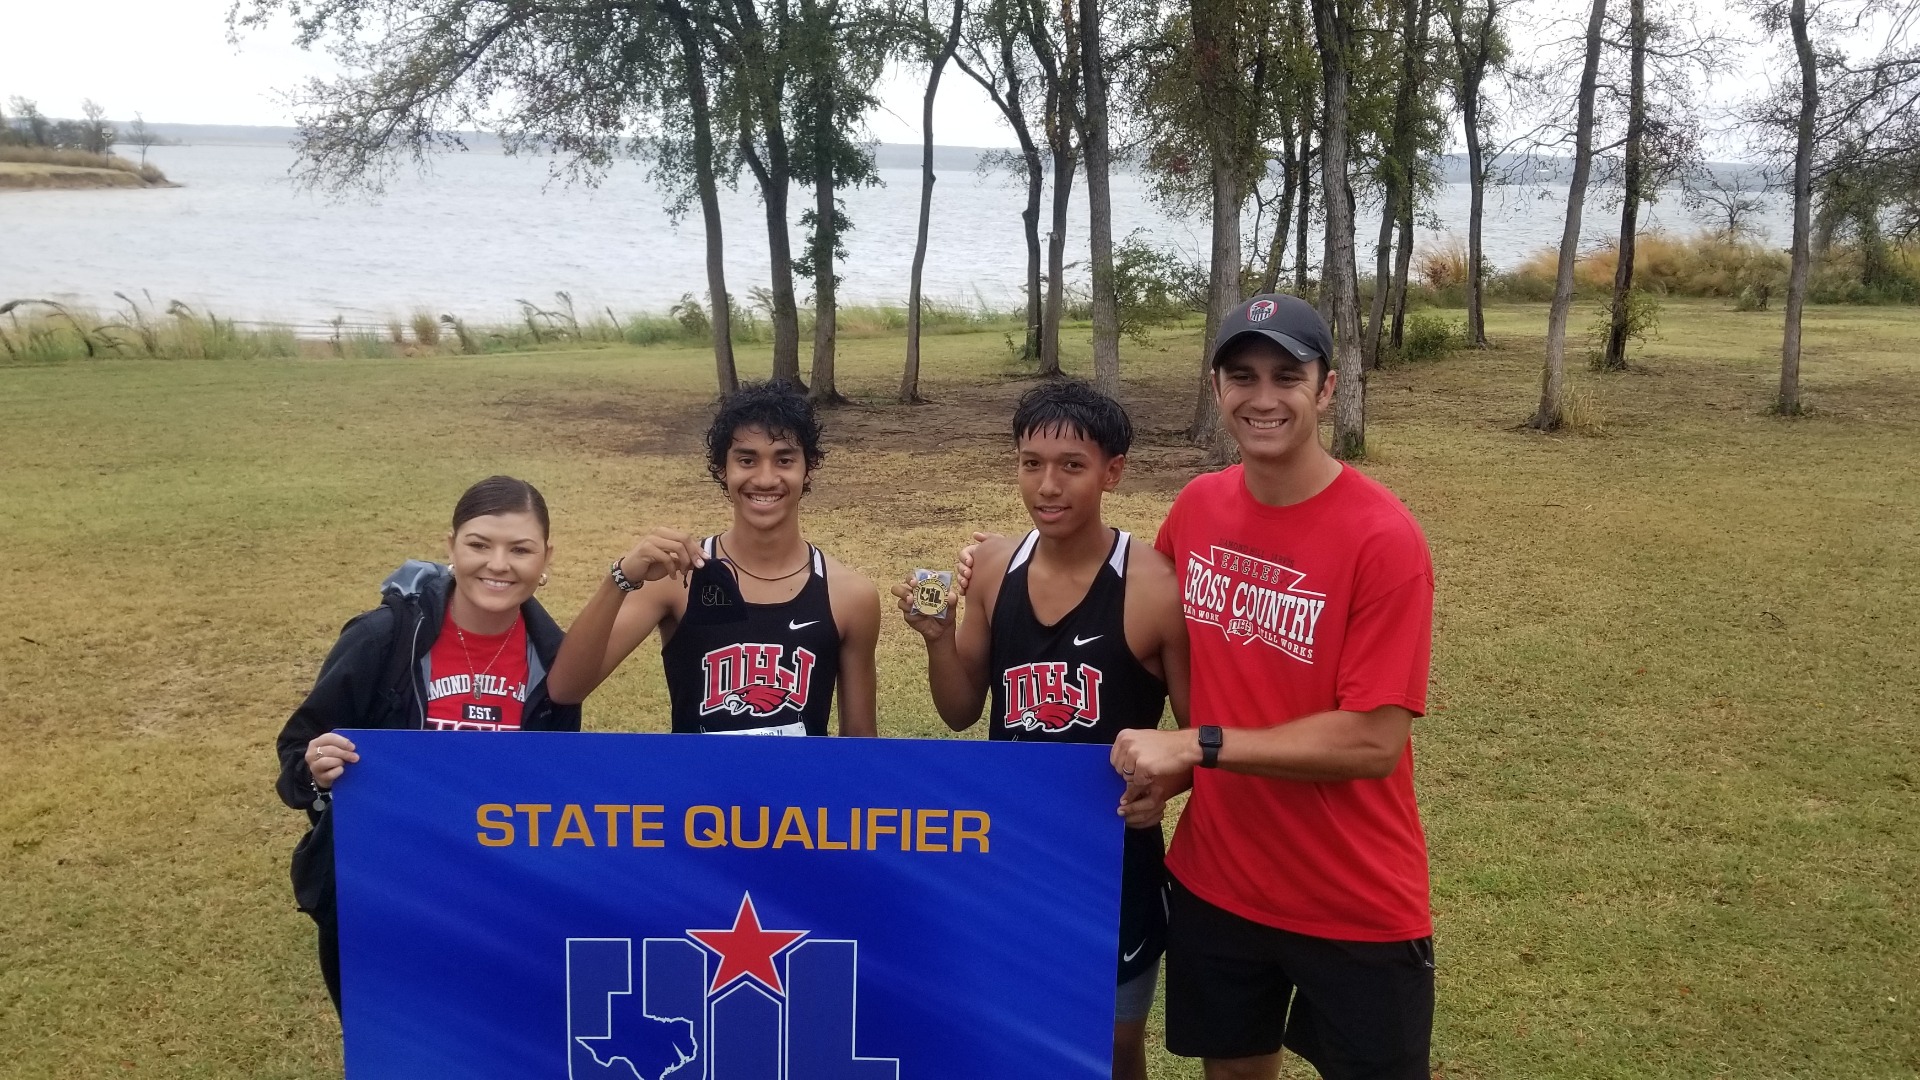 Slide 2 - Headed to the UIL State Meet